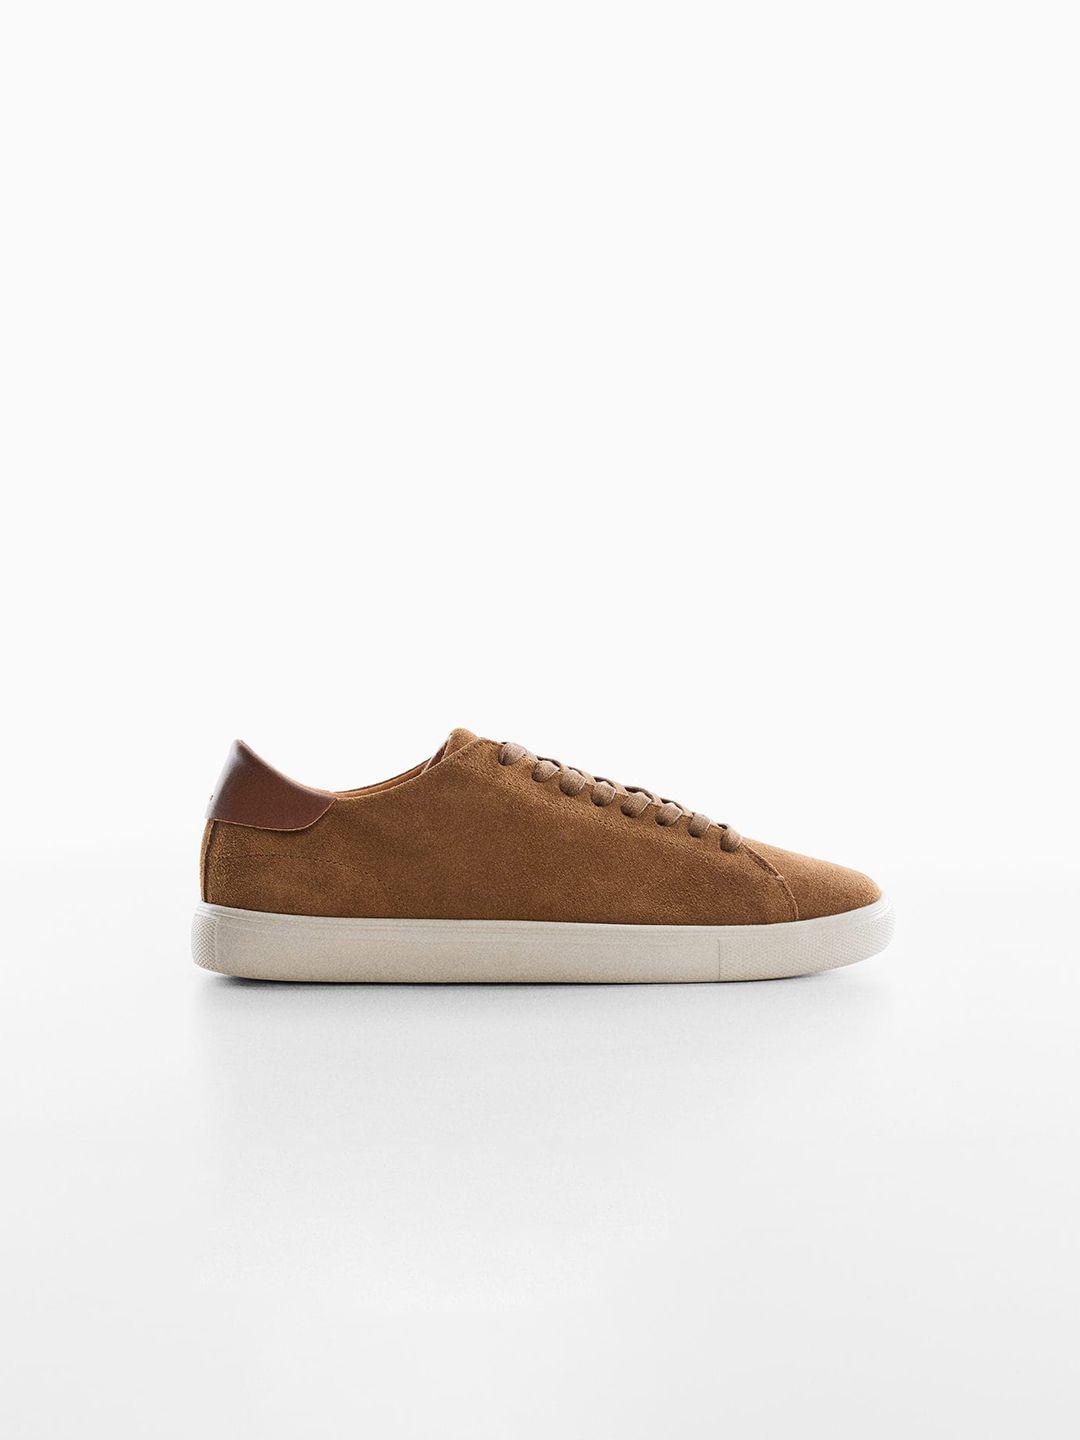 mango-man-suede-leather-sustainable-sneakers